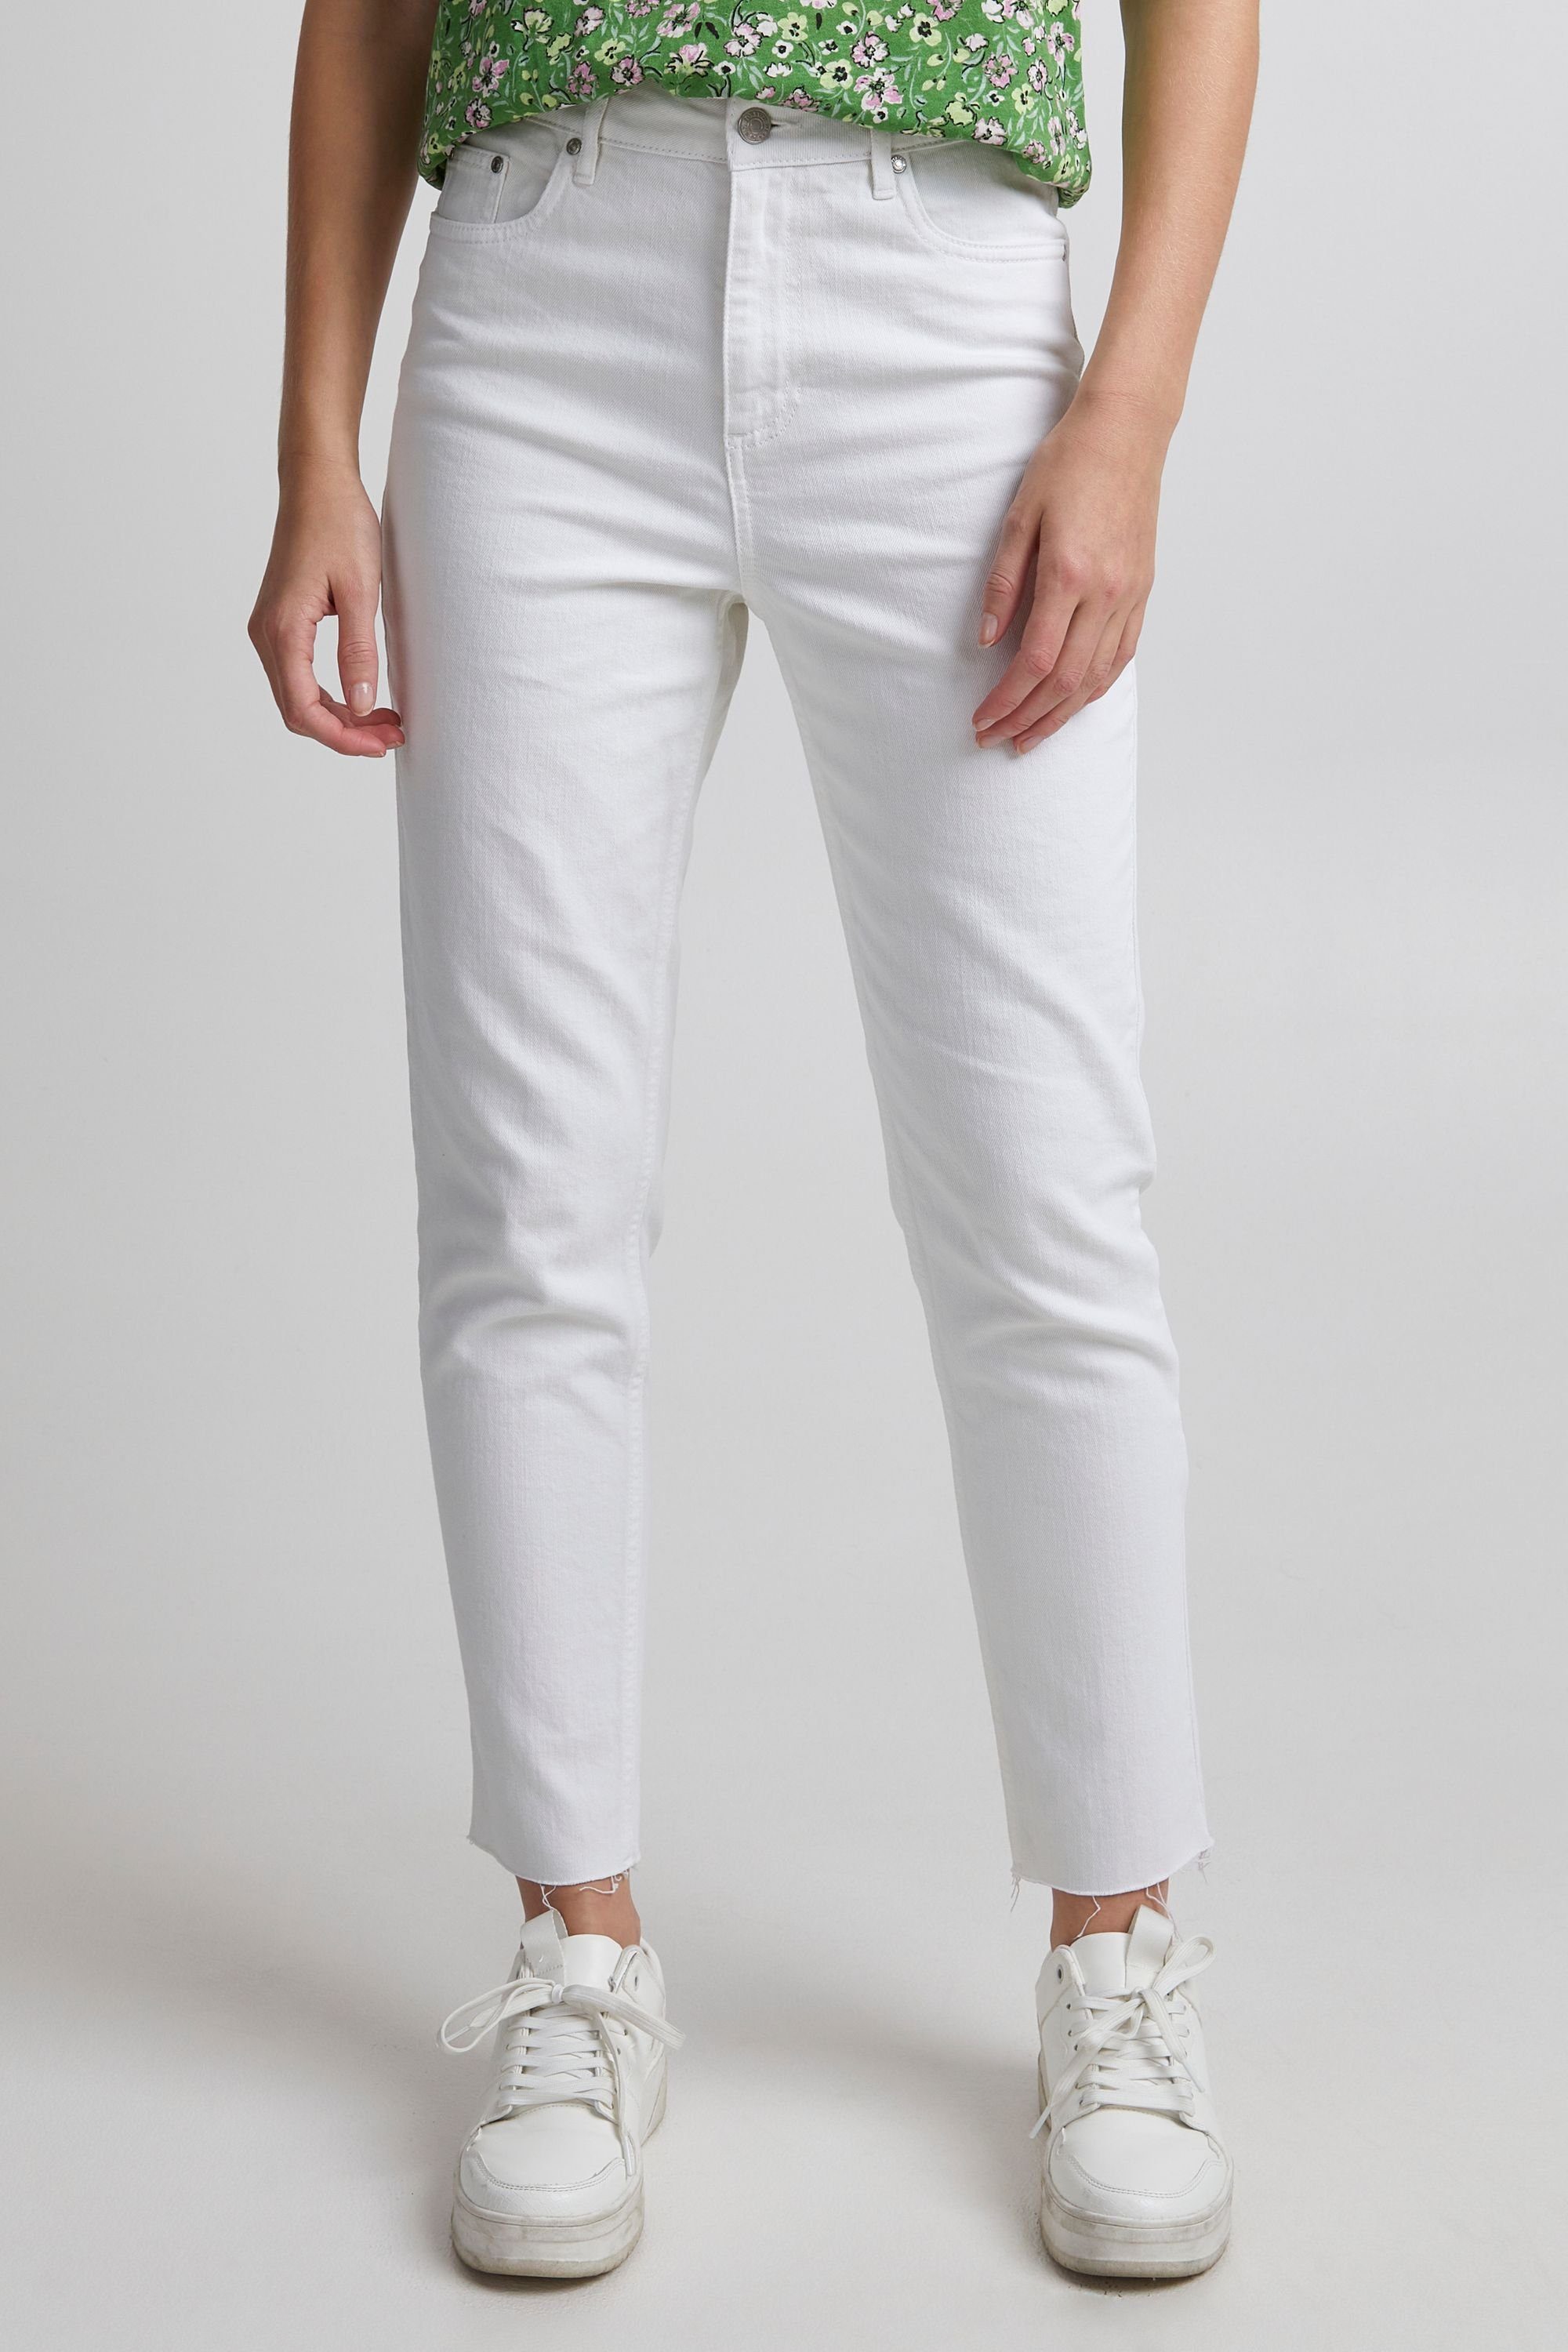 JEANS -20811188 White (114800) 5-Pocket-Jeans BYKATO BYKELONA Off b.young